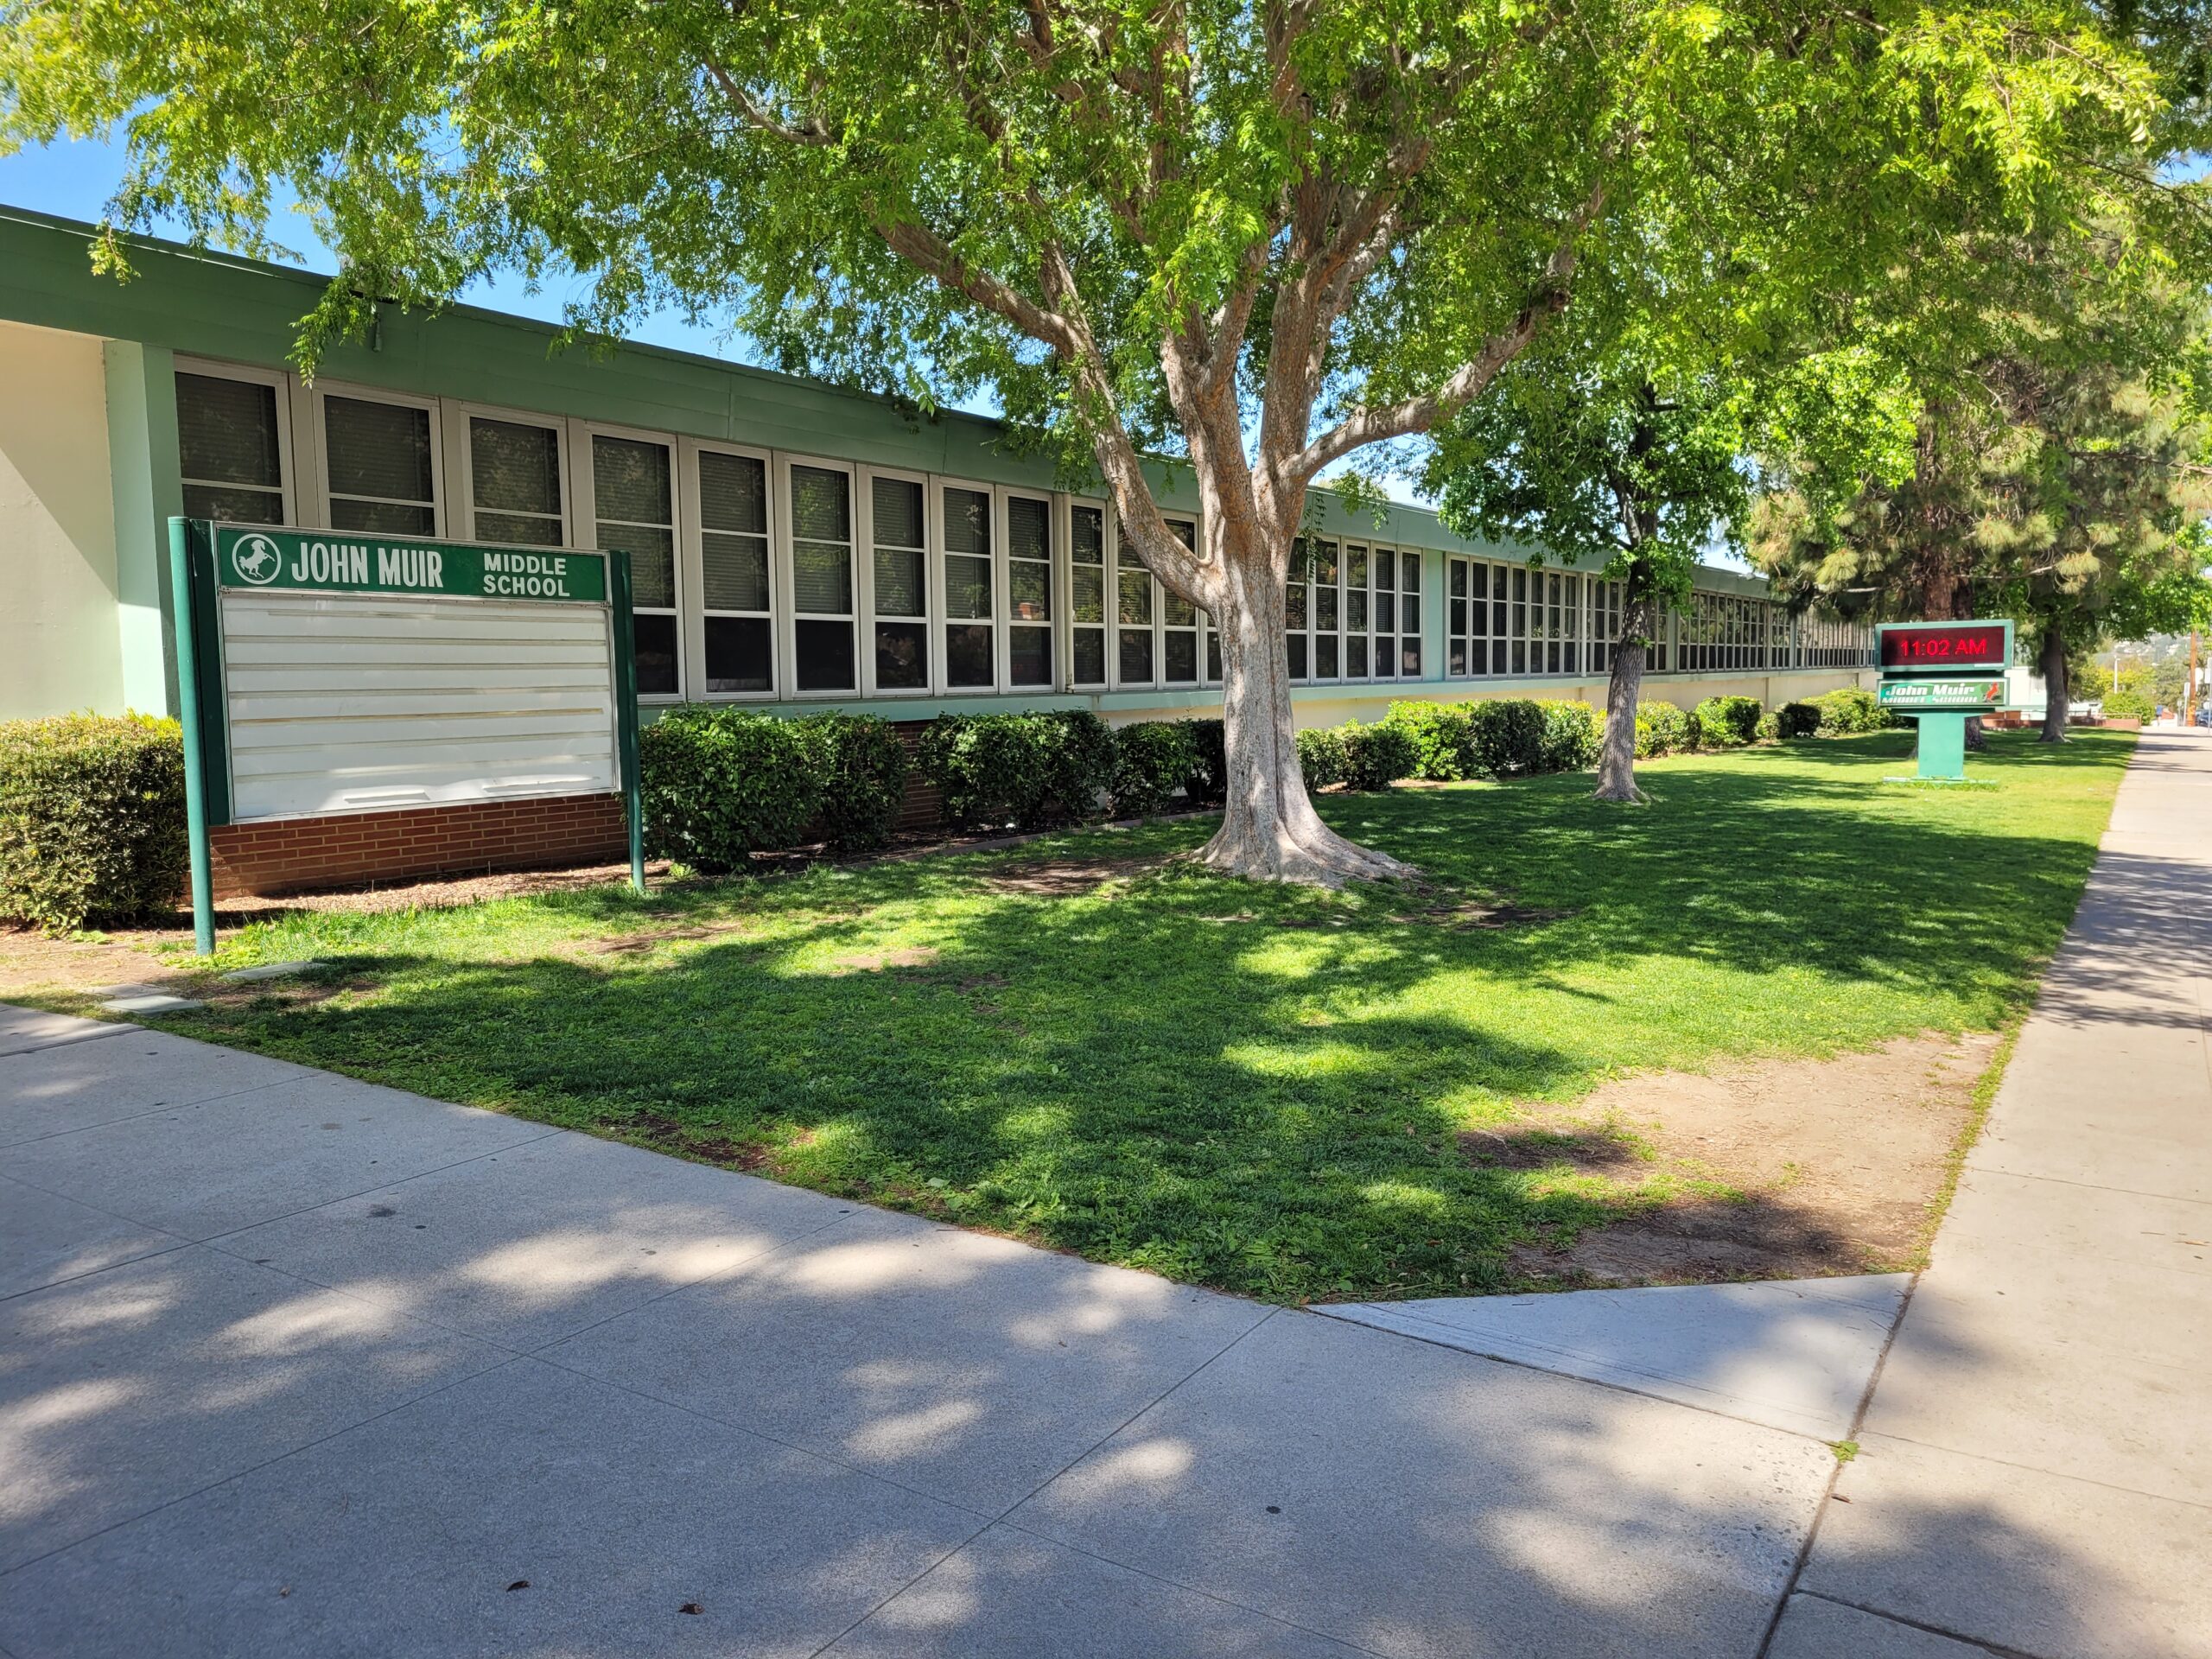 The front entrance of John Muir Middle School.